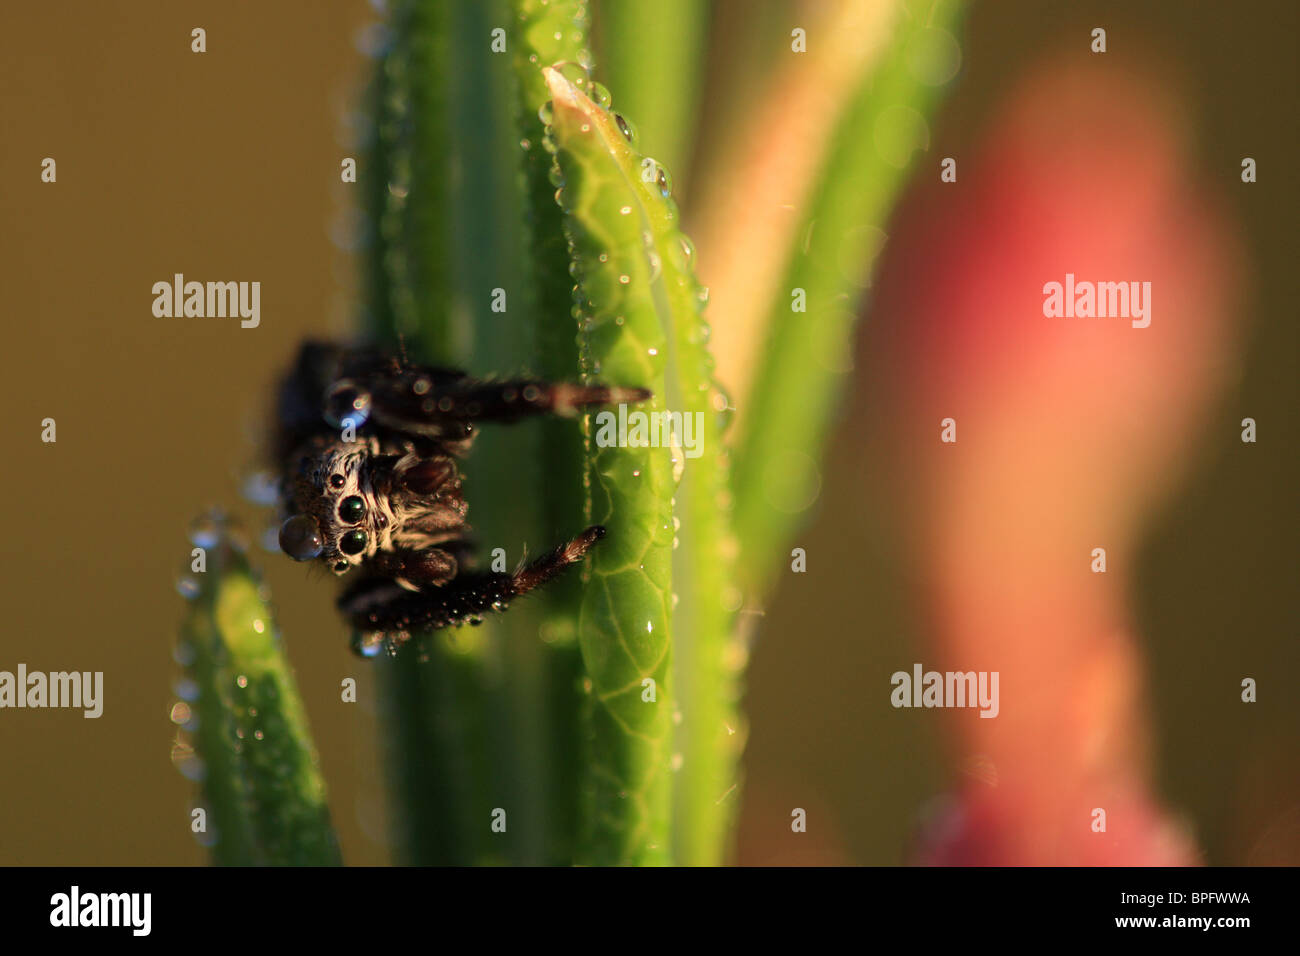 Little spider(Salticidae) covered with water drops, Estonia Stock Photo